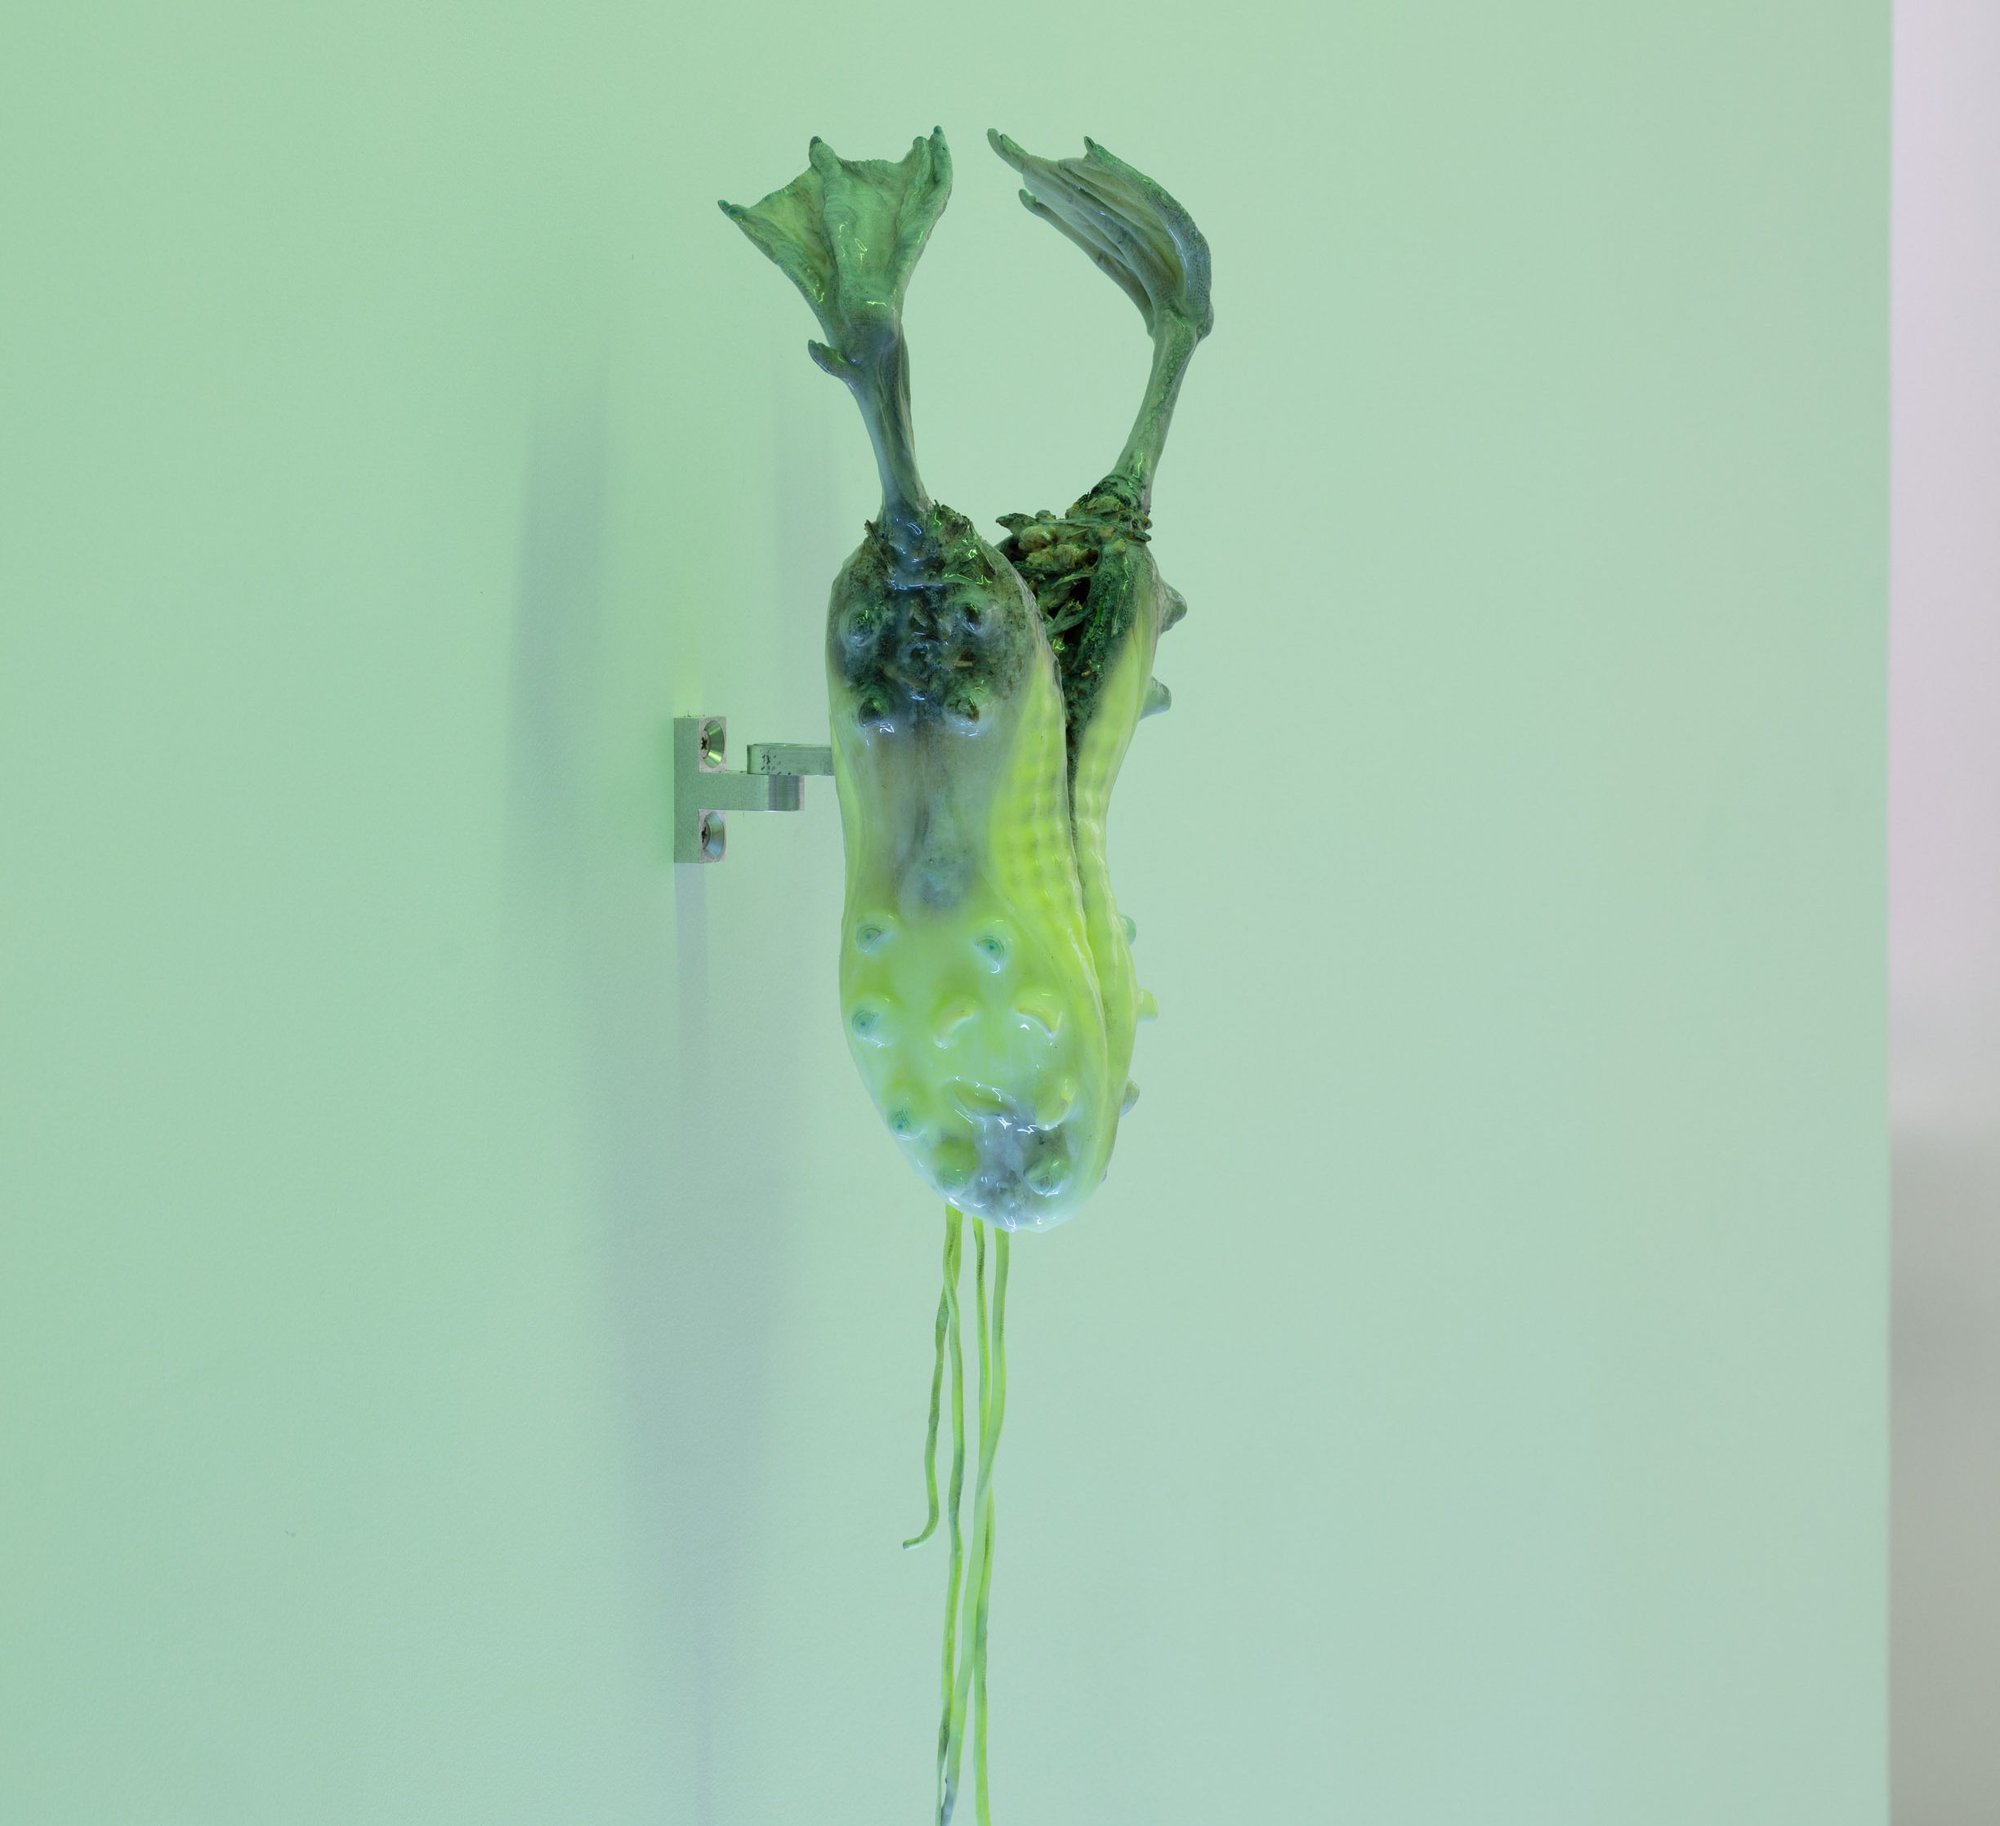 Adriano Amaral, Untitled, aluminum structure, burned football boots, goose feet, grasshop‐ pers, silicone, reflective glass beads, 2018. Installation view, Condo, Rodeo, London, 2019.